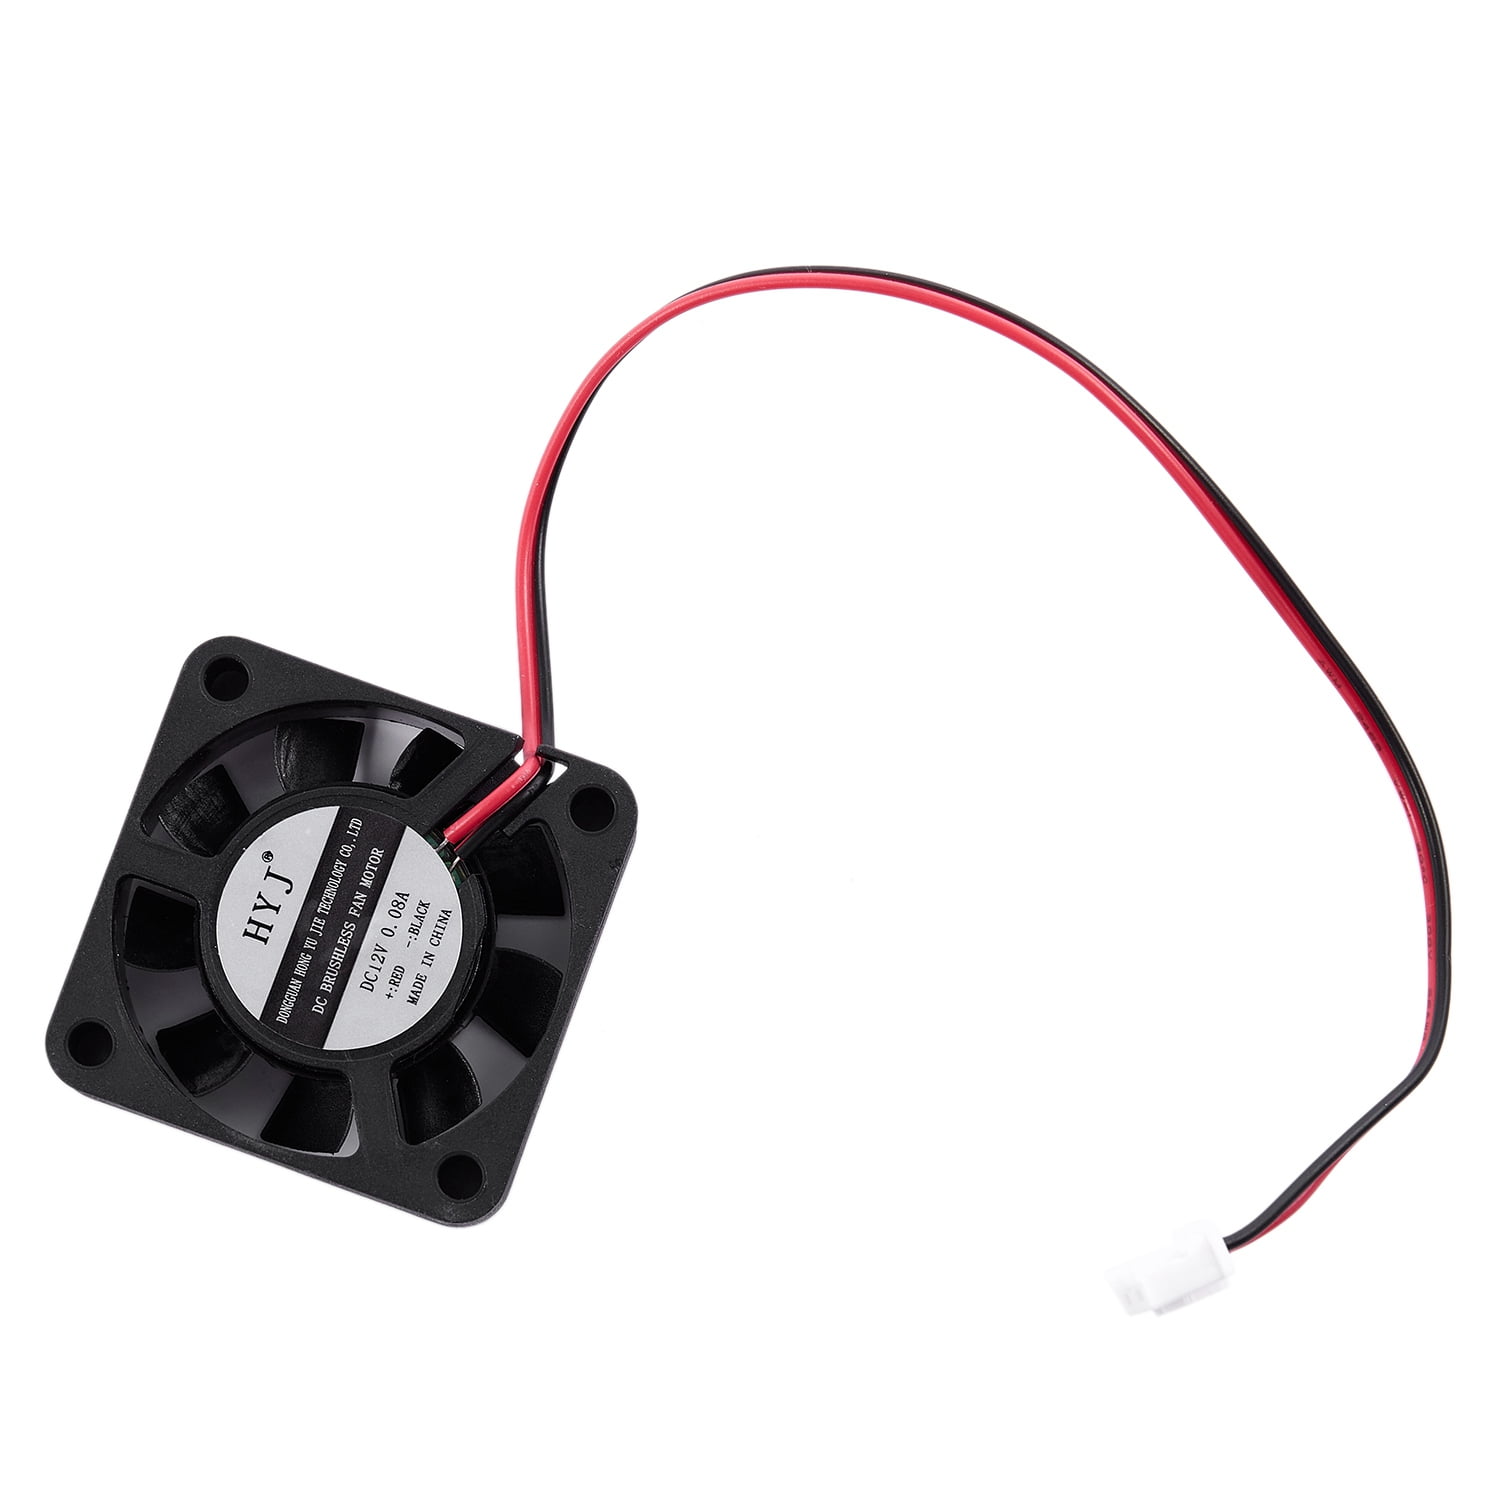 DC 12V 0.1A 40mm x 40mm 2 Pin Connector PC CPU Computer Case Brushless DC Fan 